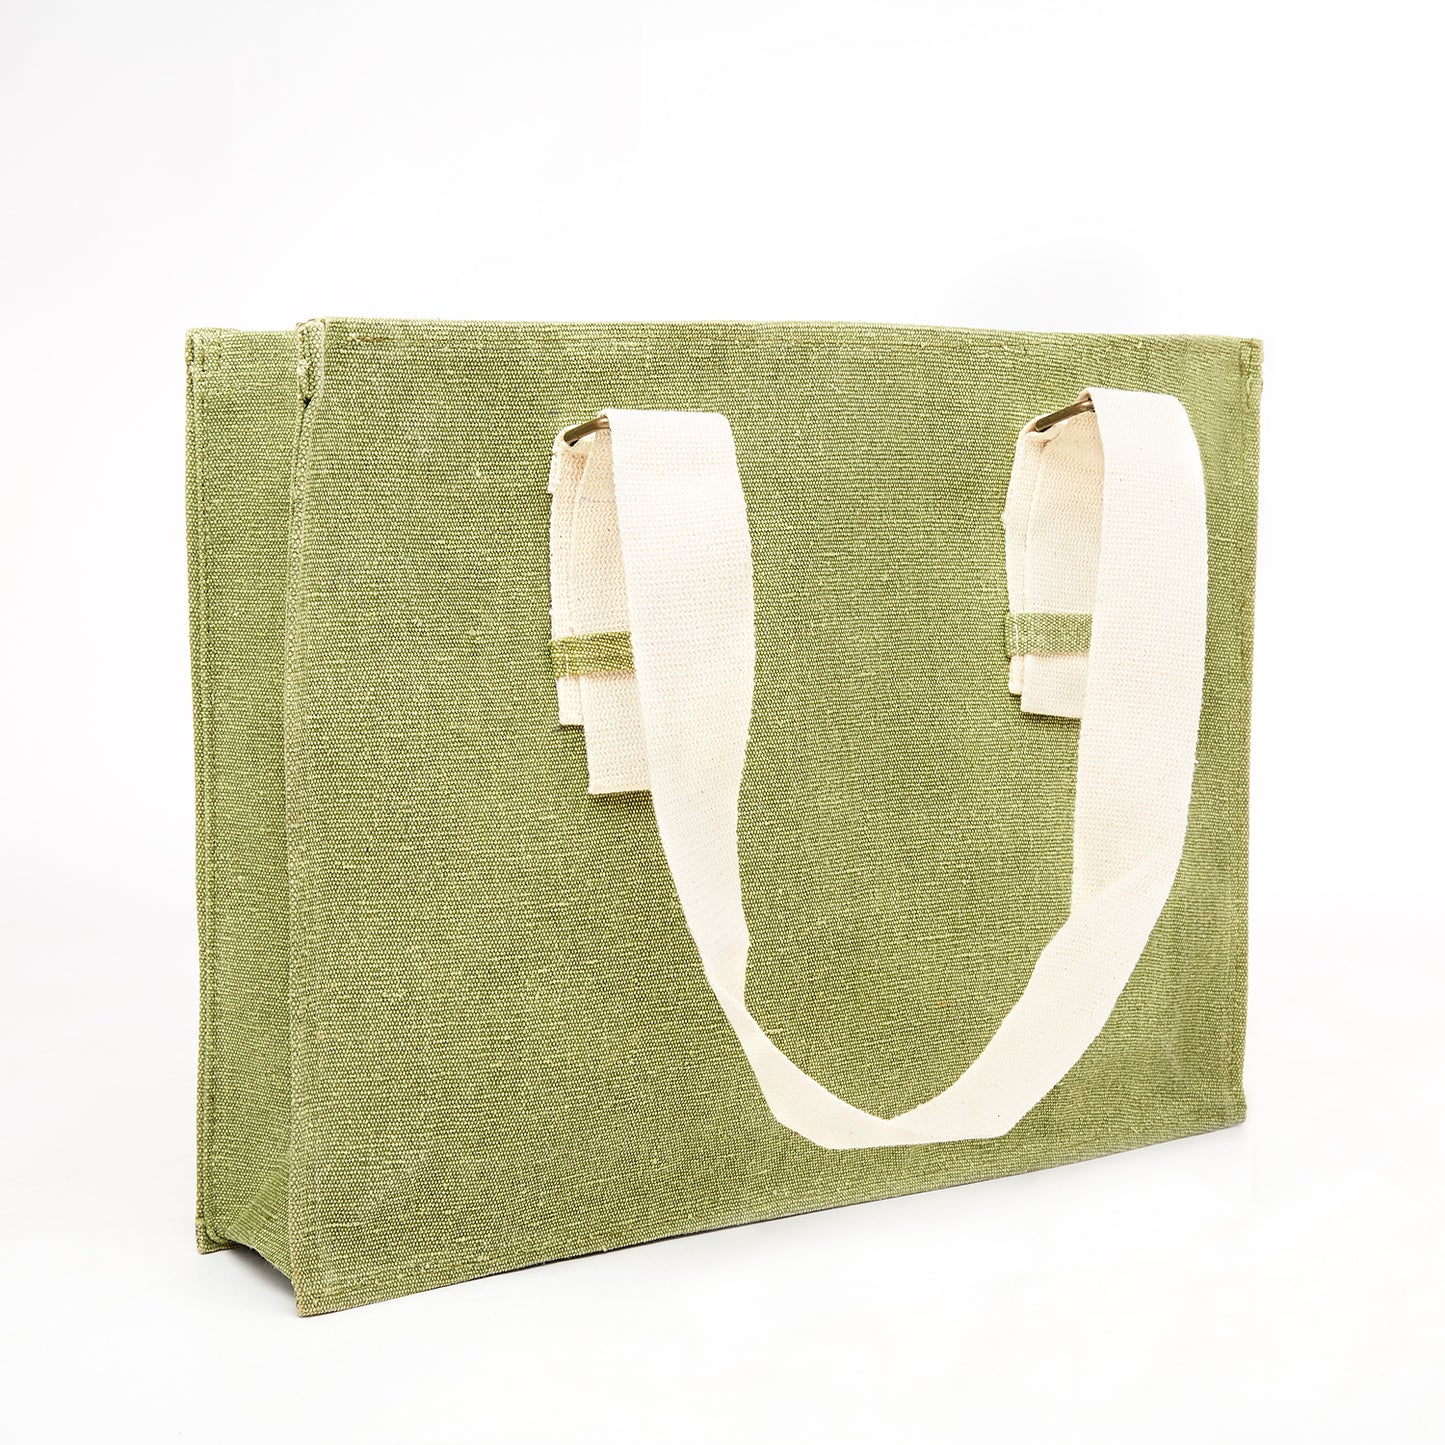 Pickle Green Colored Canvas Bag